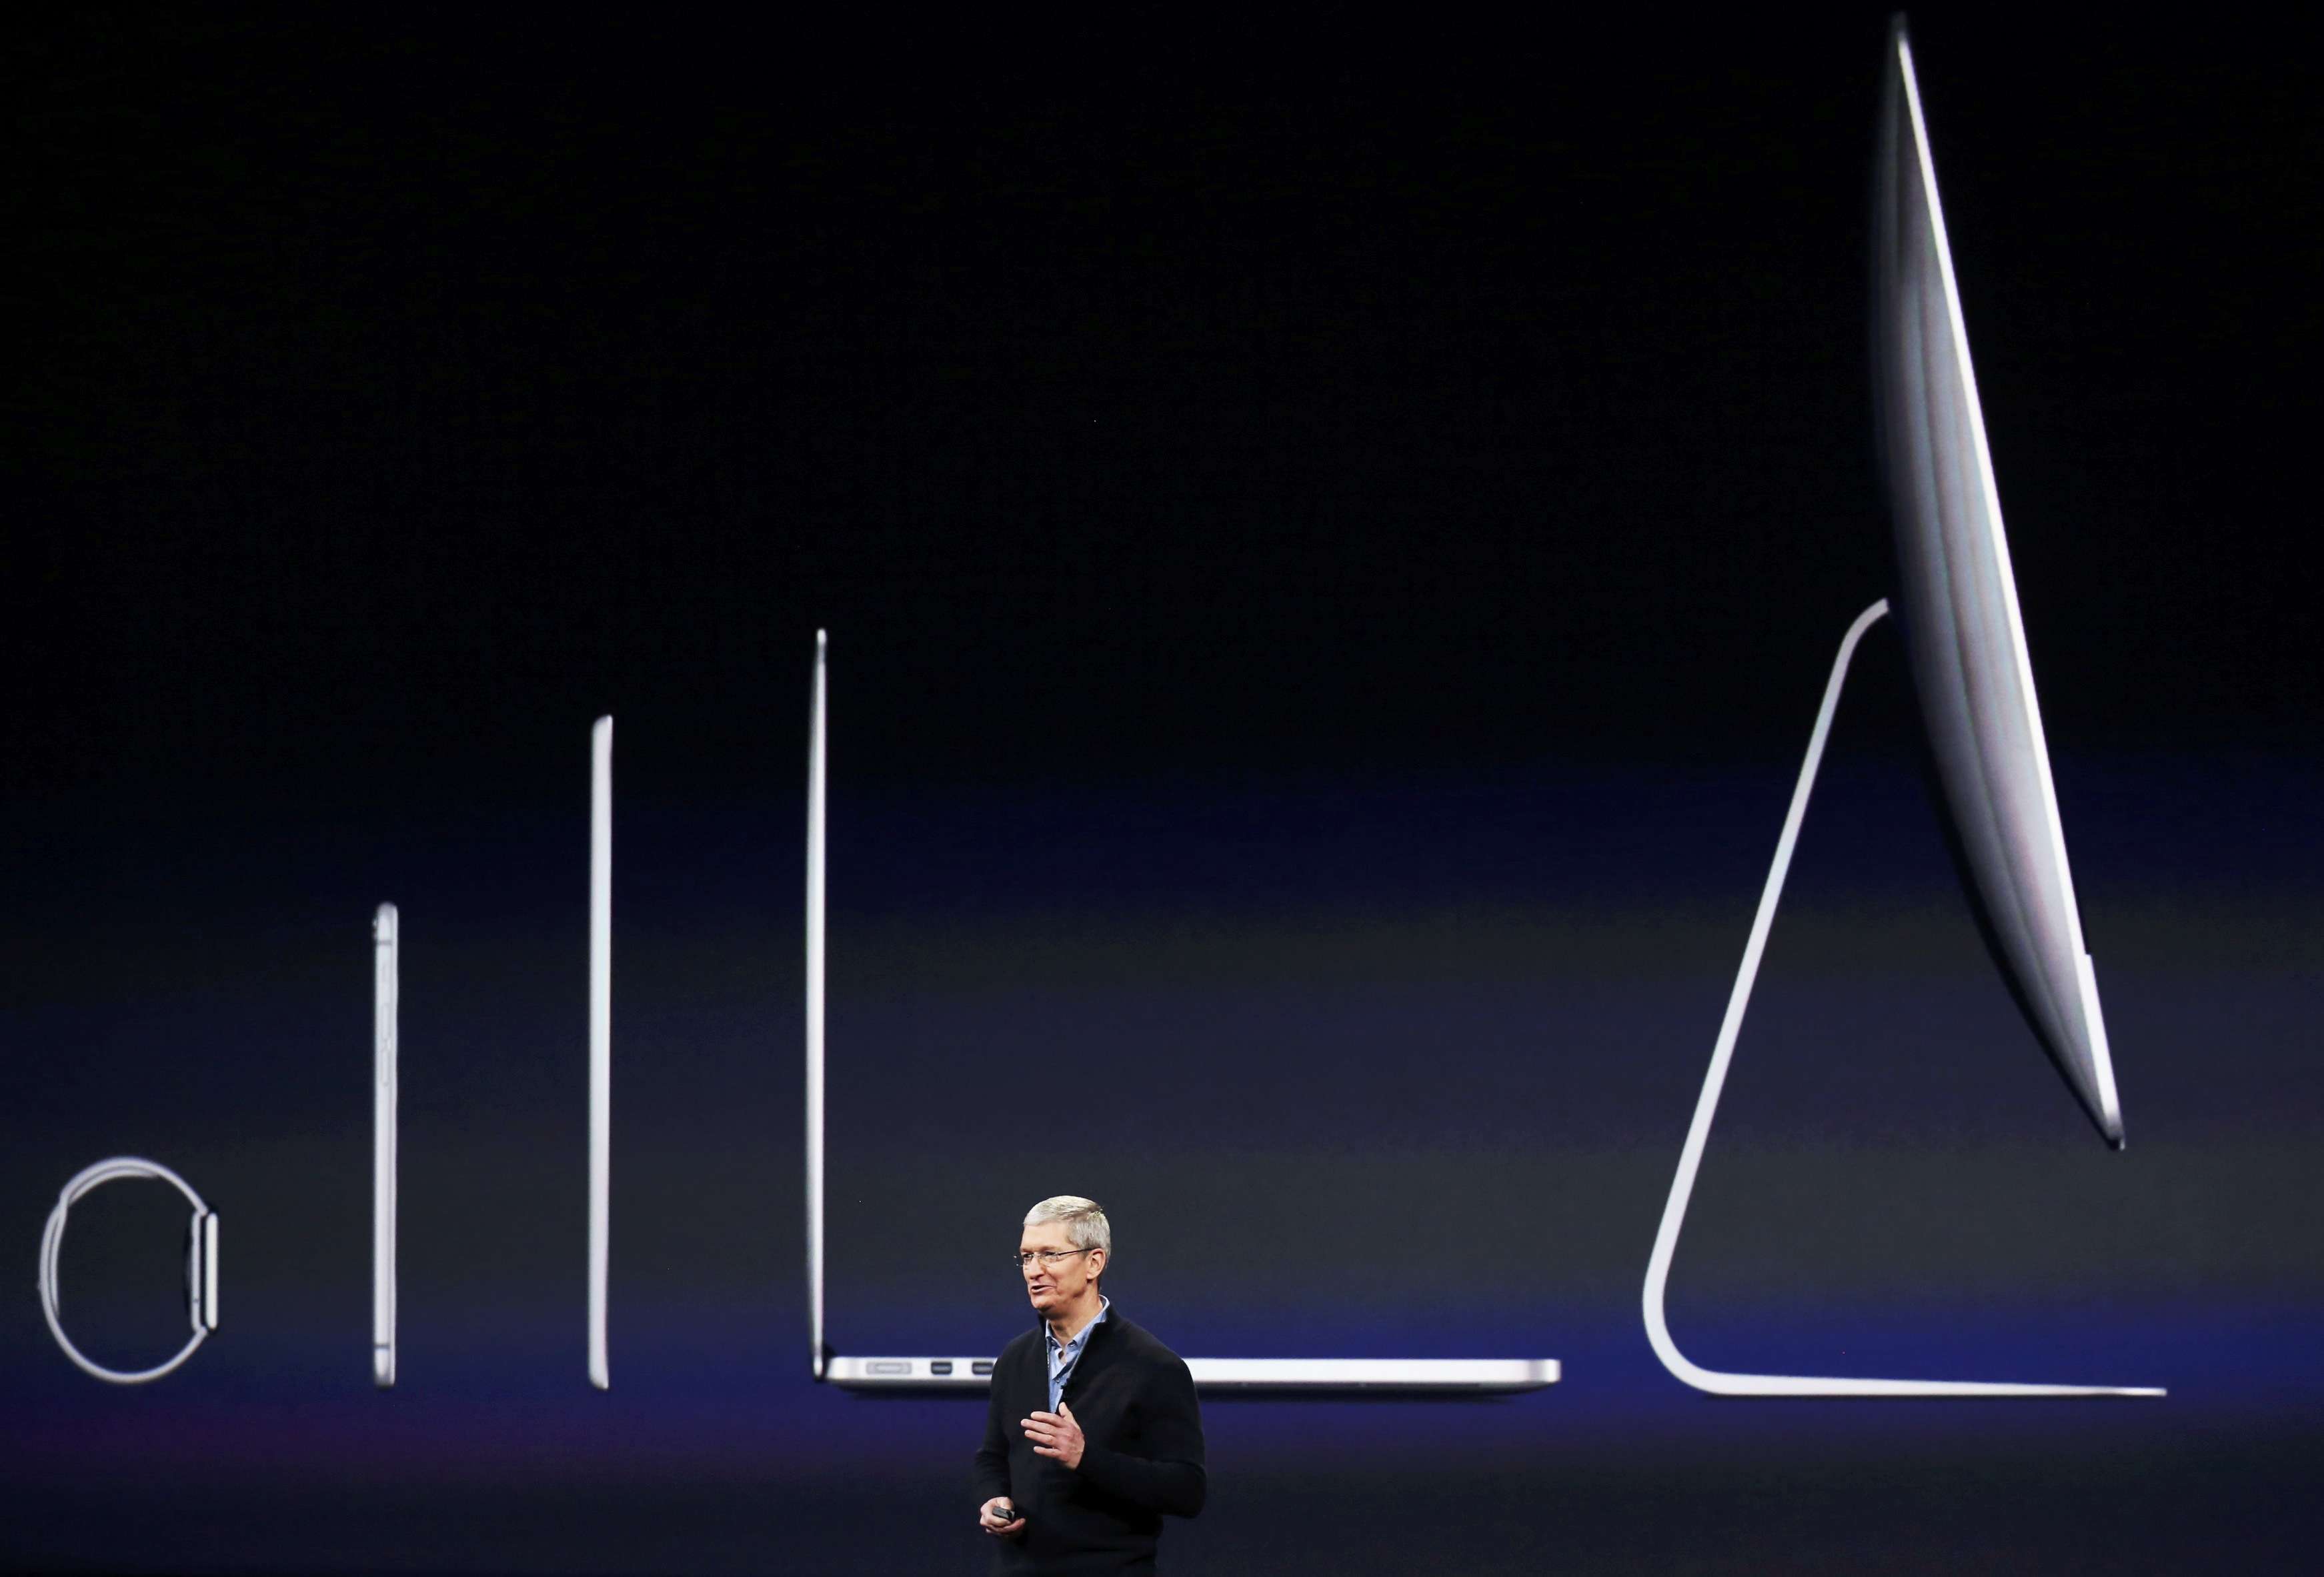 Apple CEO Tim Cook speaks about the company's computers during an Apple event in San Francisco, California March 9, 2015. REUTERS/Robert Galbraith (UNITED STATES - Tags: SCIENCE TECHNOLOGY BUSINESS)